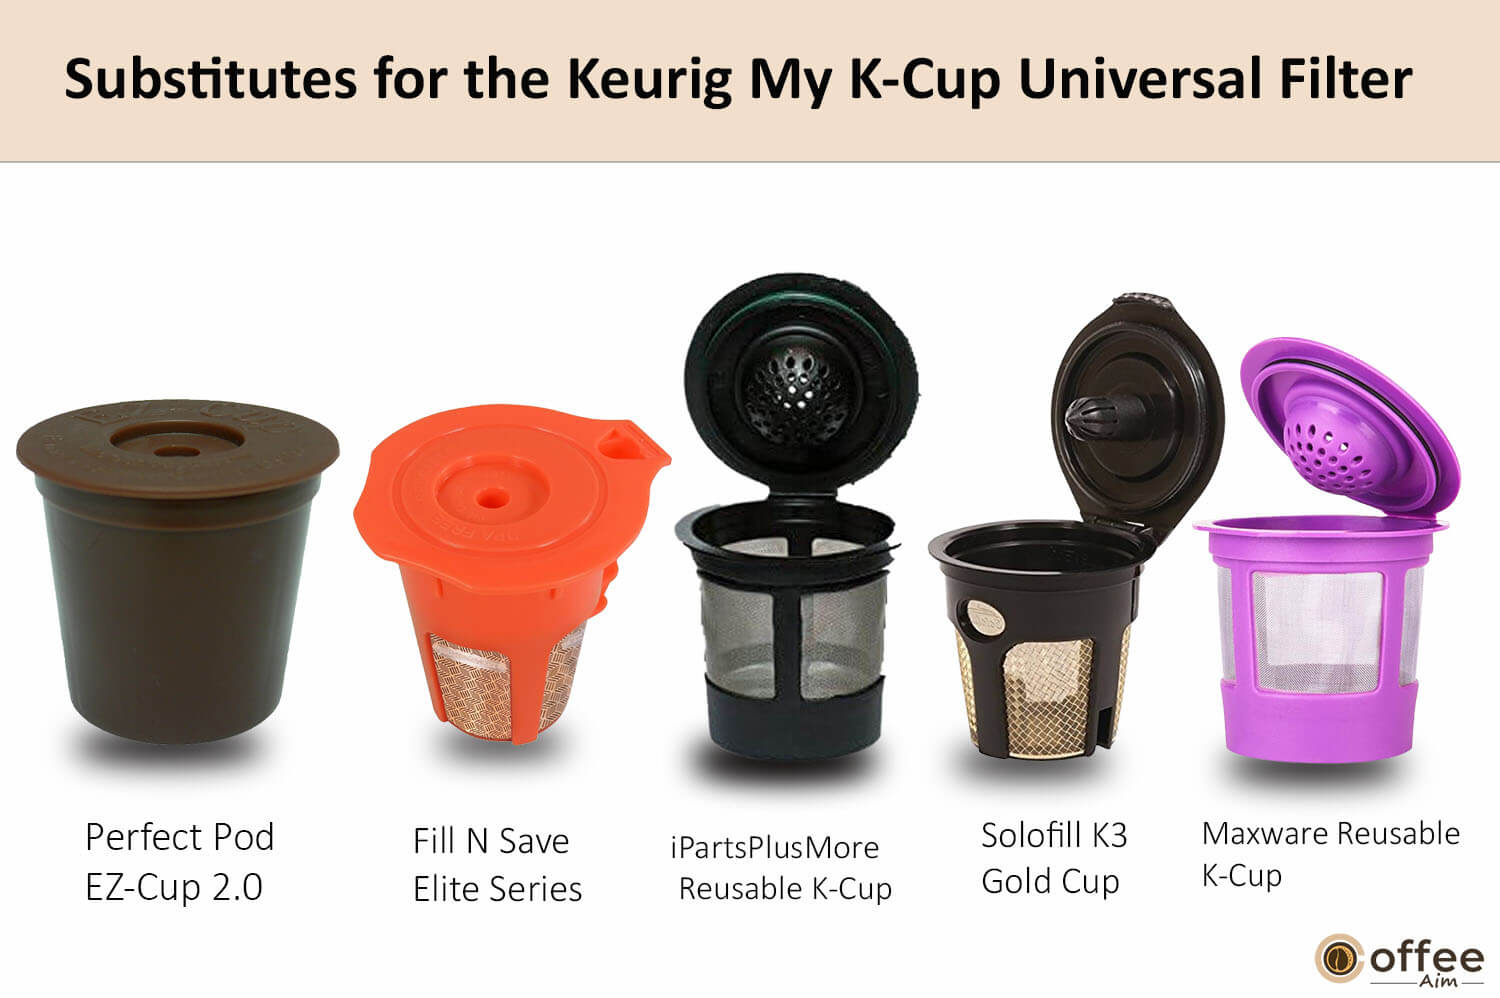 In this picture, I'm illustrating the Alternatives of Keurig My K-Cup Universal Filter.